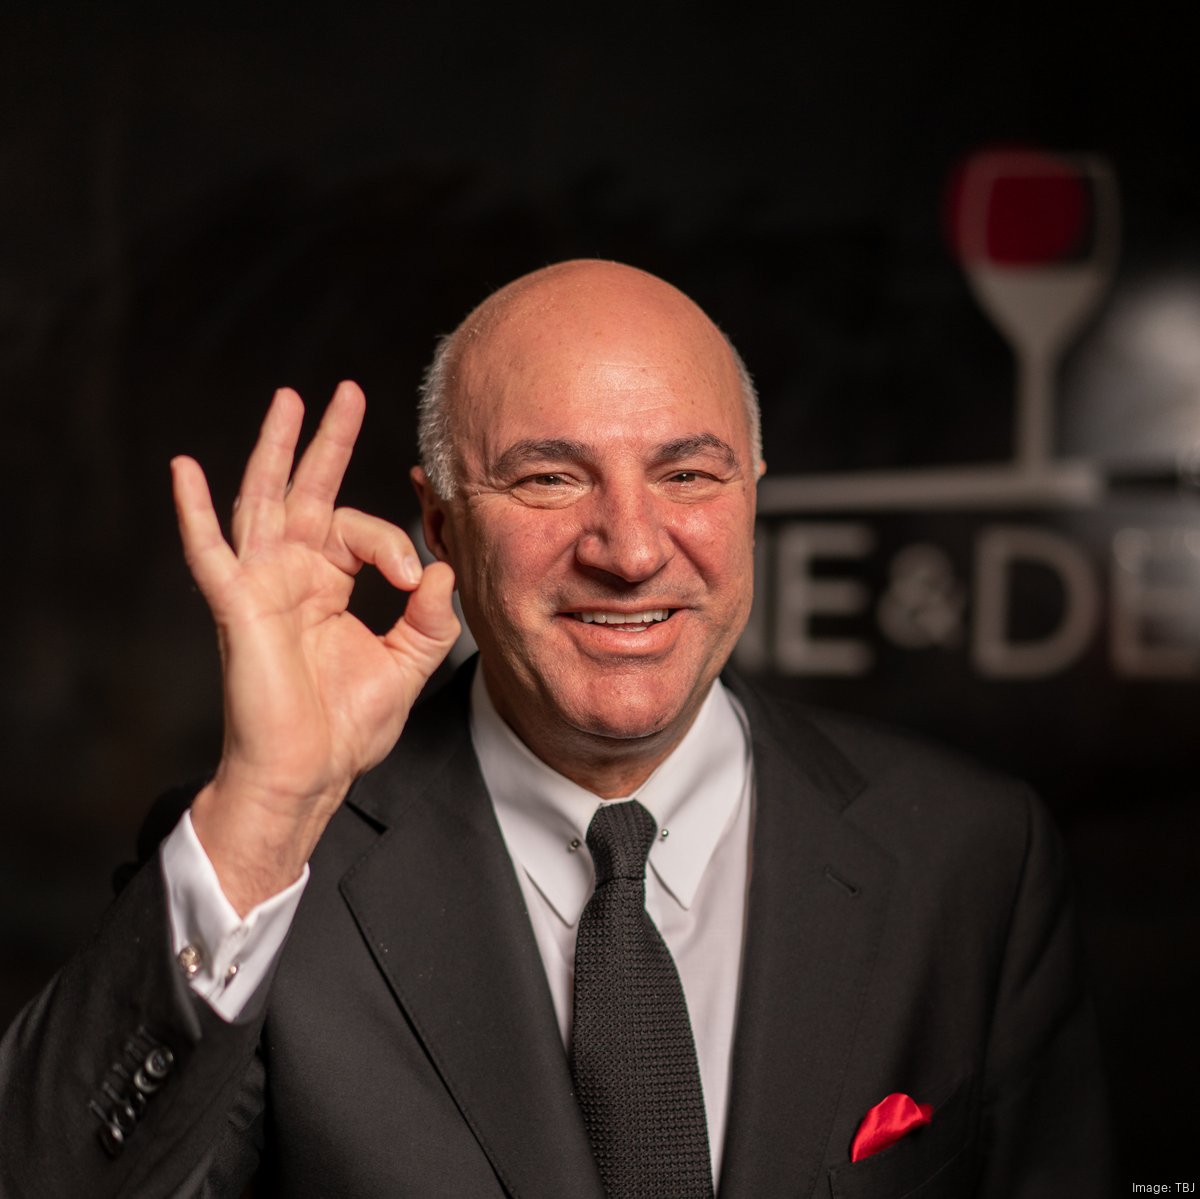 Shark Tank: Bridal Buddy Accepts $75,000 Offer from Kevin O'Leary